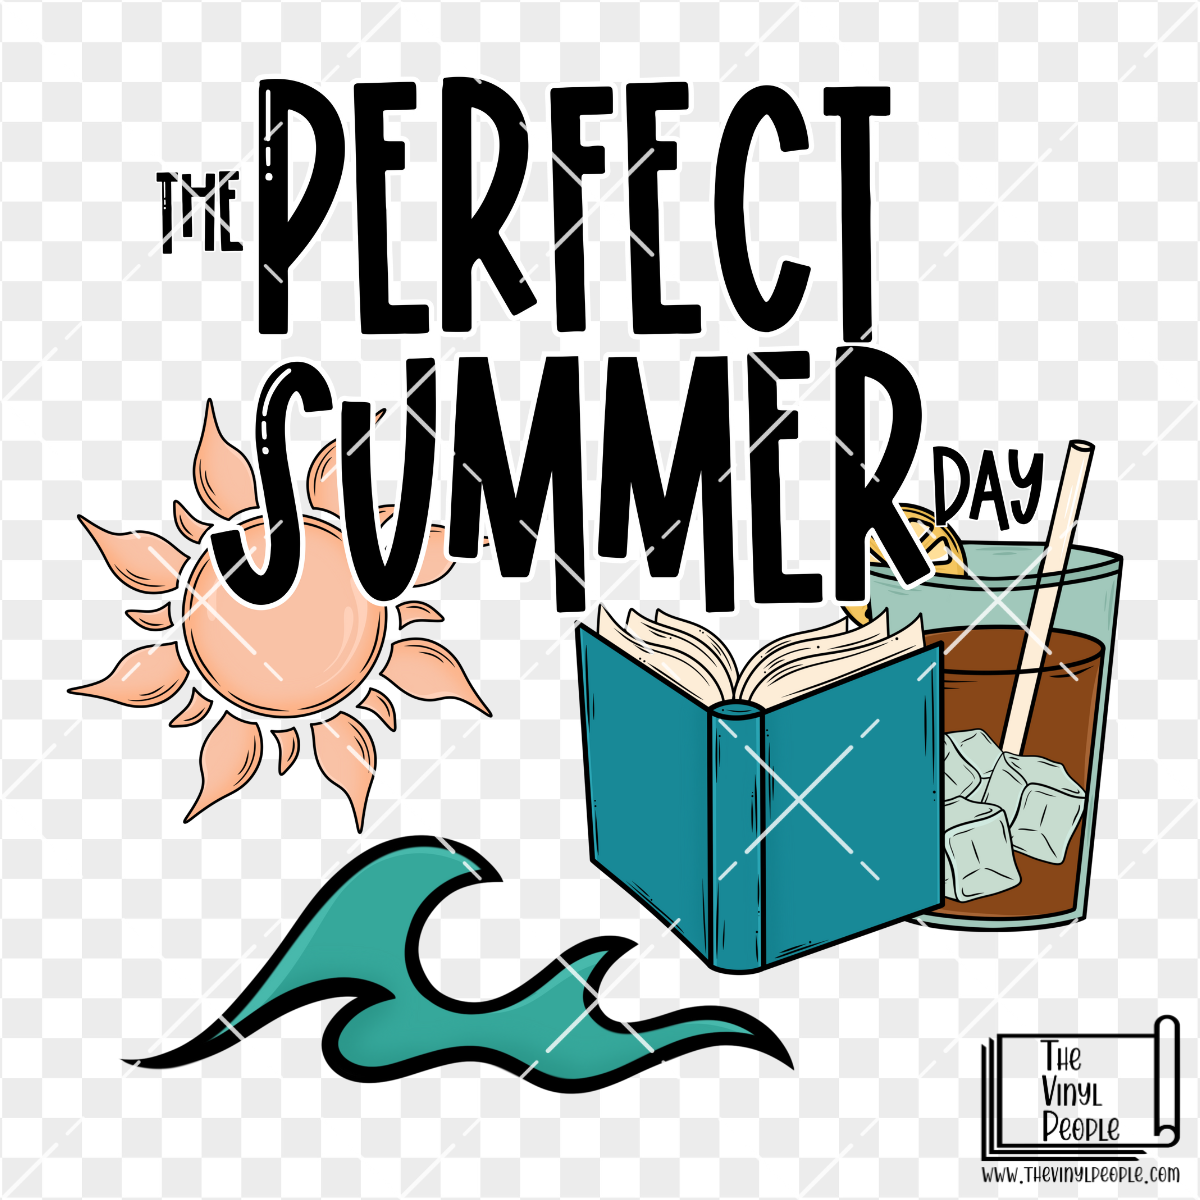 Perfect Summer Day Vinyl Decal